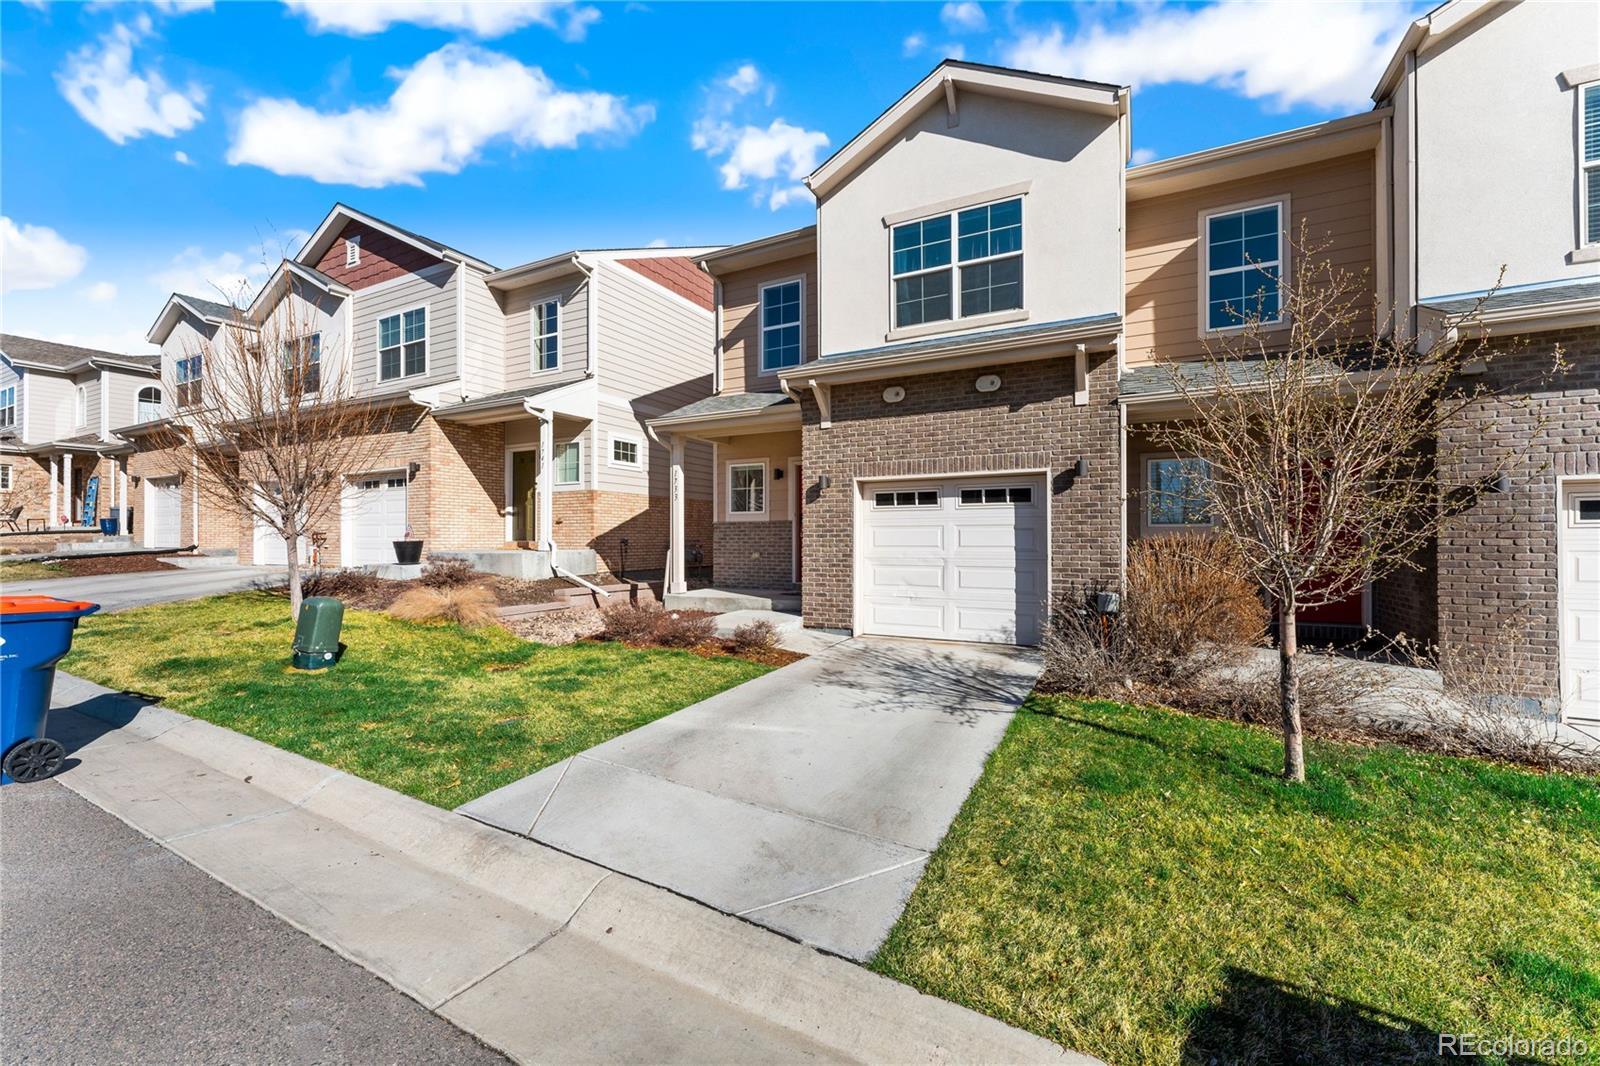 Photo one of 1733 W 52Nd Ct Denver CO 80221 | MLS 7435170